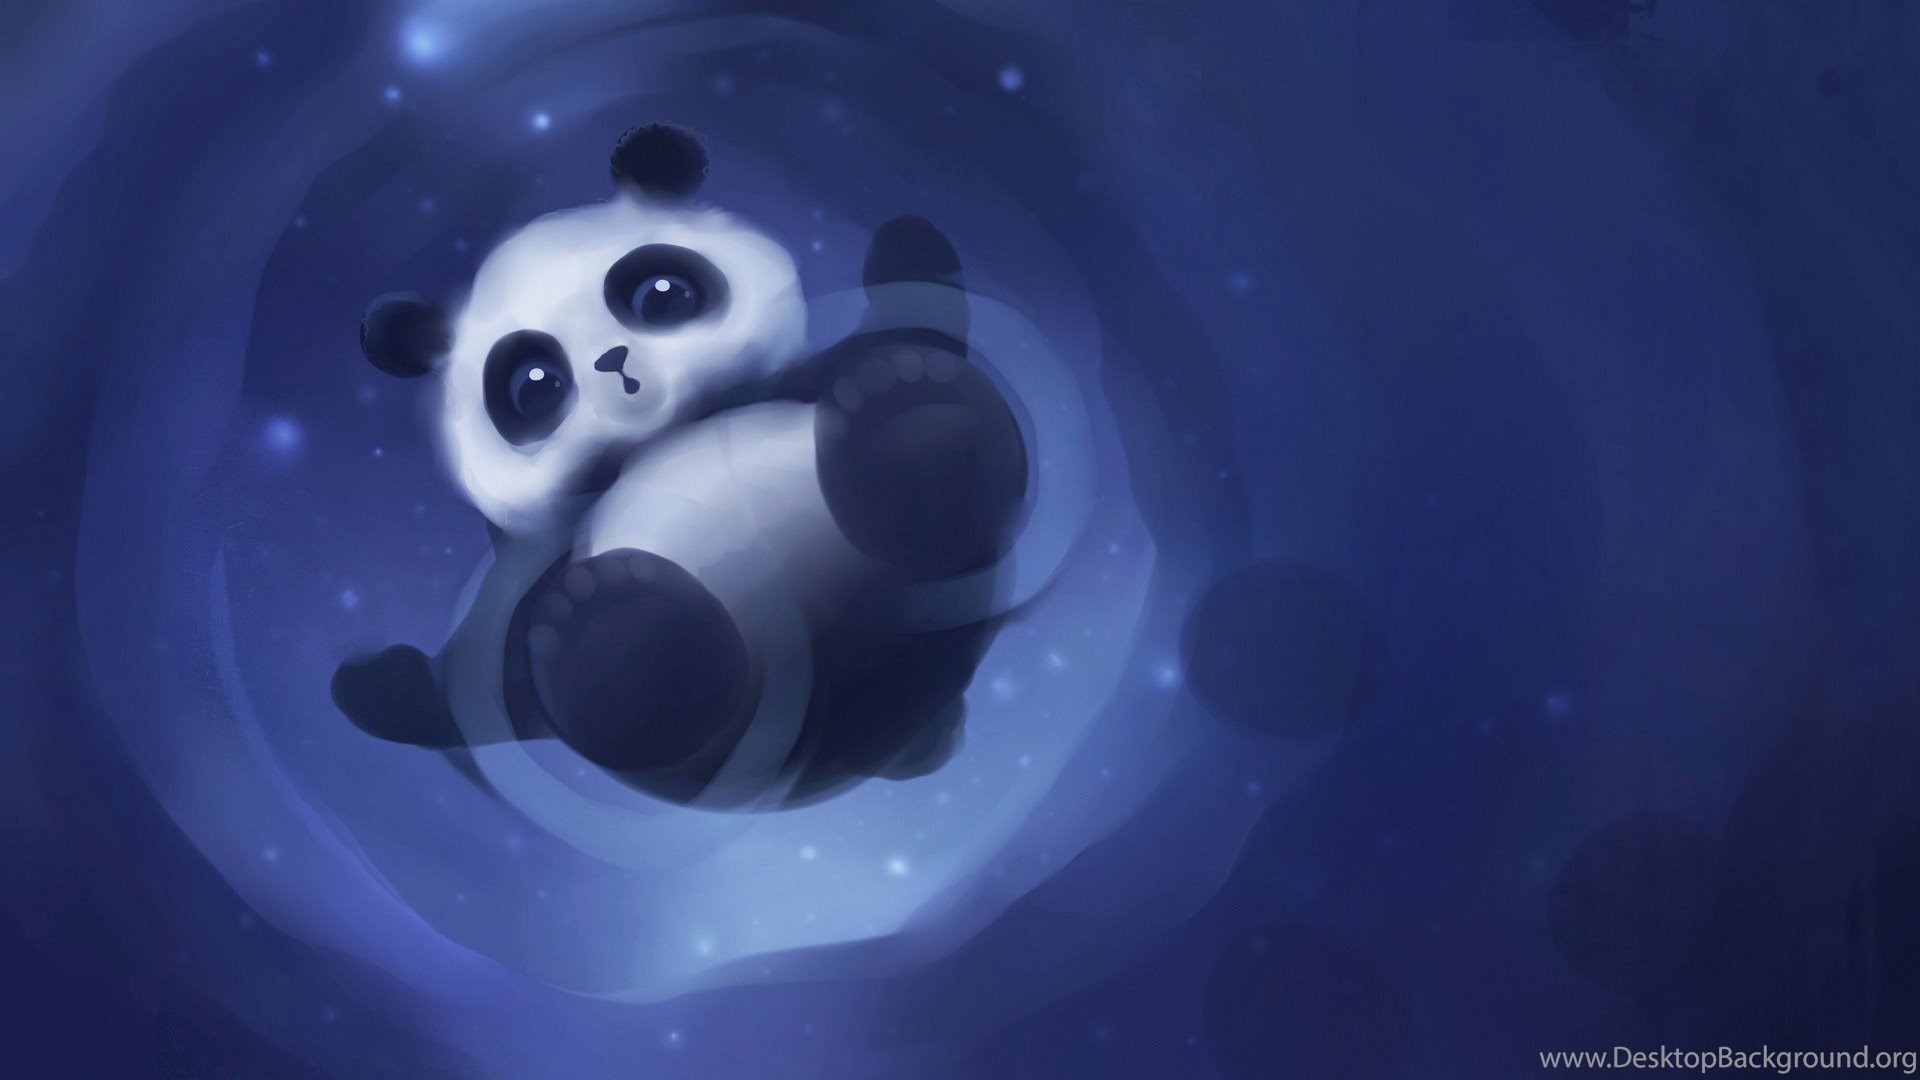 1920x1080 Panda Anime Wallpapers HD Attachment 9635 Amazing Wallpaperz